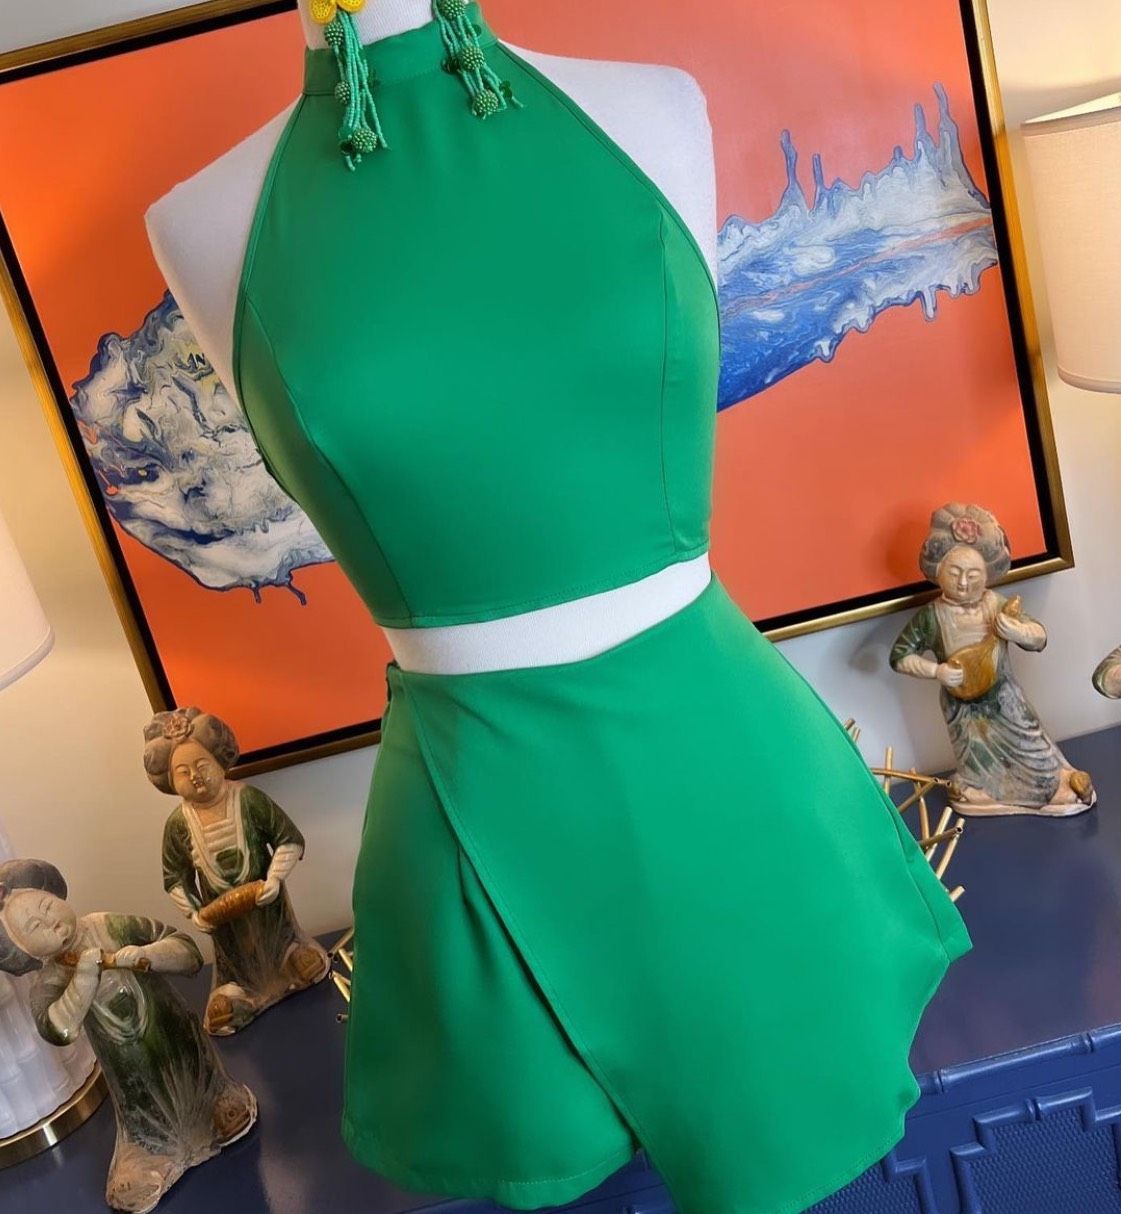 Size 0 Green Formal Jumpsuit on Queenly